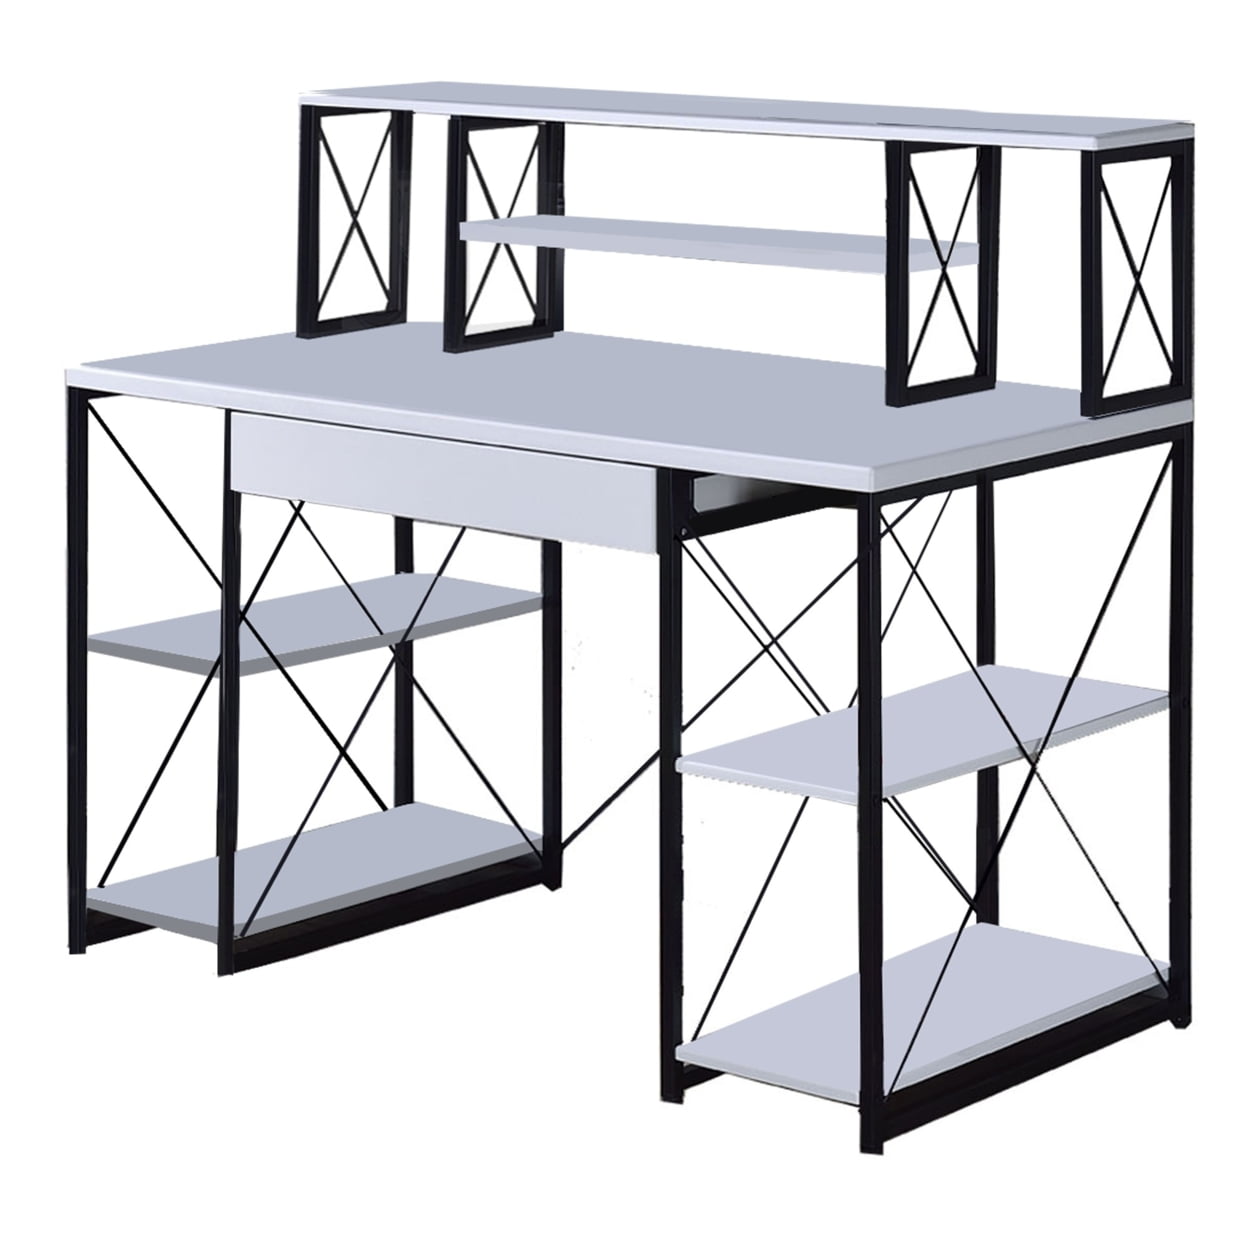 Bm209614 Industrial Style Desk With 4 Open Selves & Bookcase Hutch - White - 41 X 24 X 47 In.